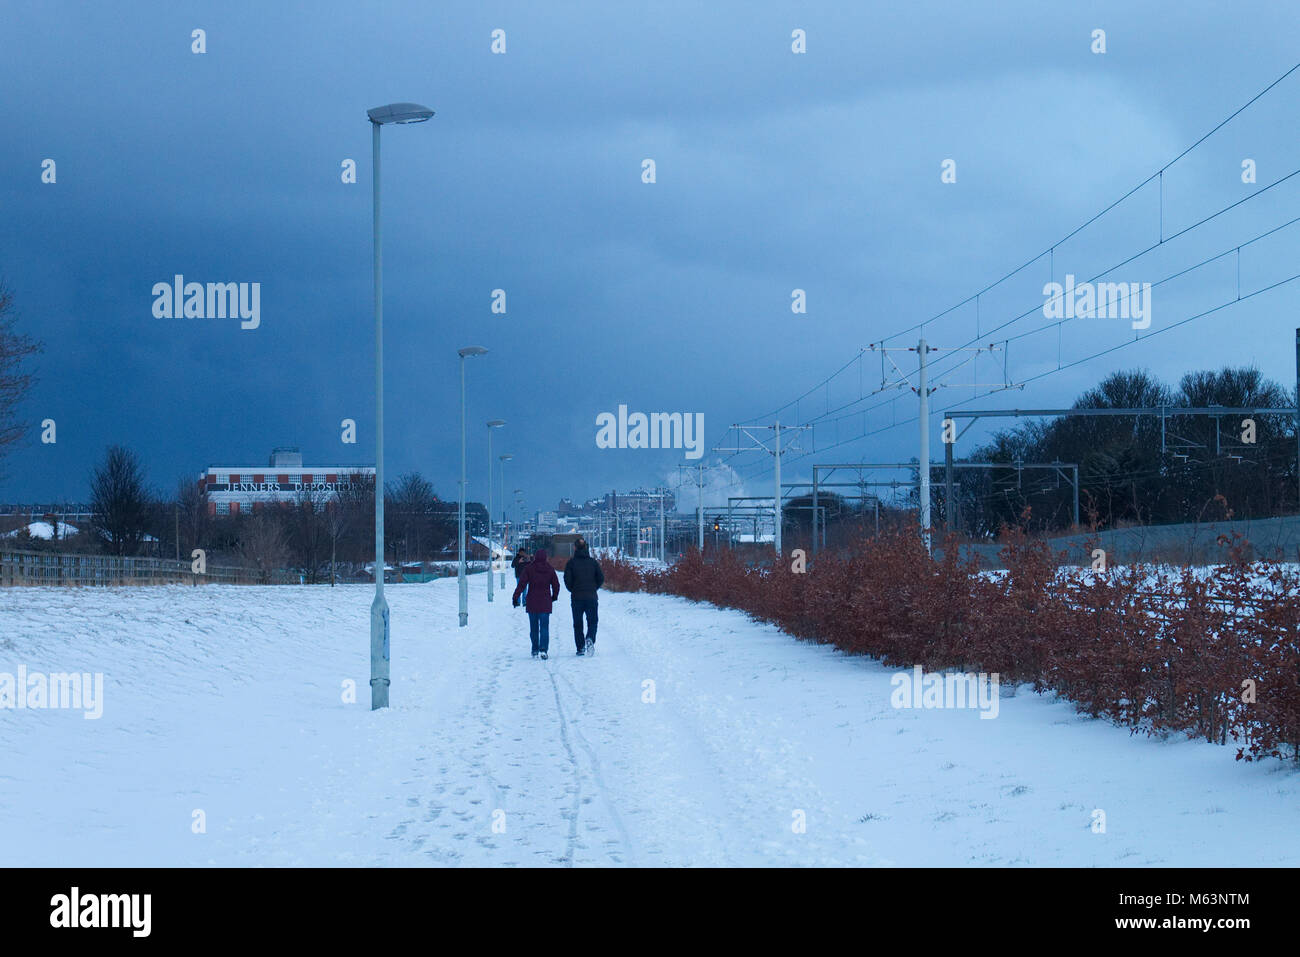 Edinburgh, Scotland, UK. 28th February, 2018. A couple is walking on the path adjacent to the Edinburgh Tram Line as the snow storm 'the Beast from the East' is moving into Edinburgh.  Credit: Iscotlanda/Alamy Live News Stock Photo